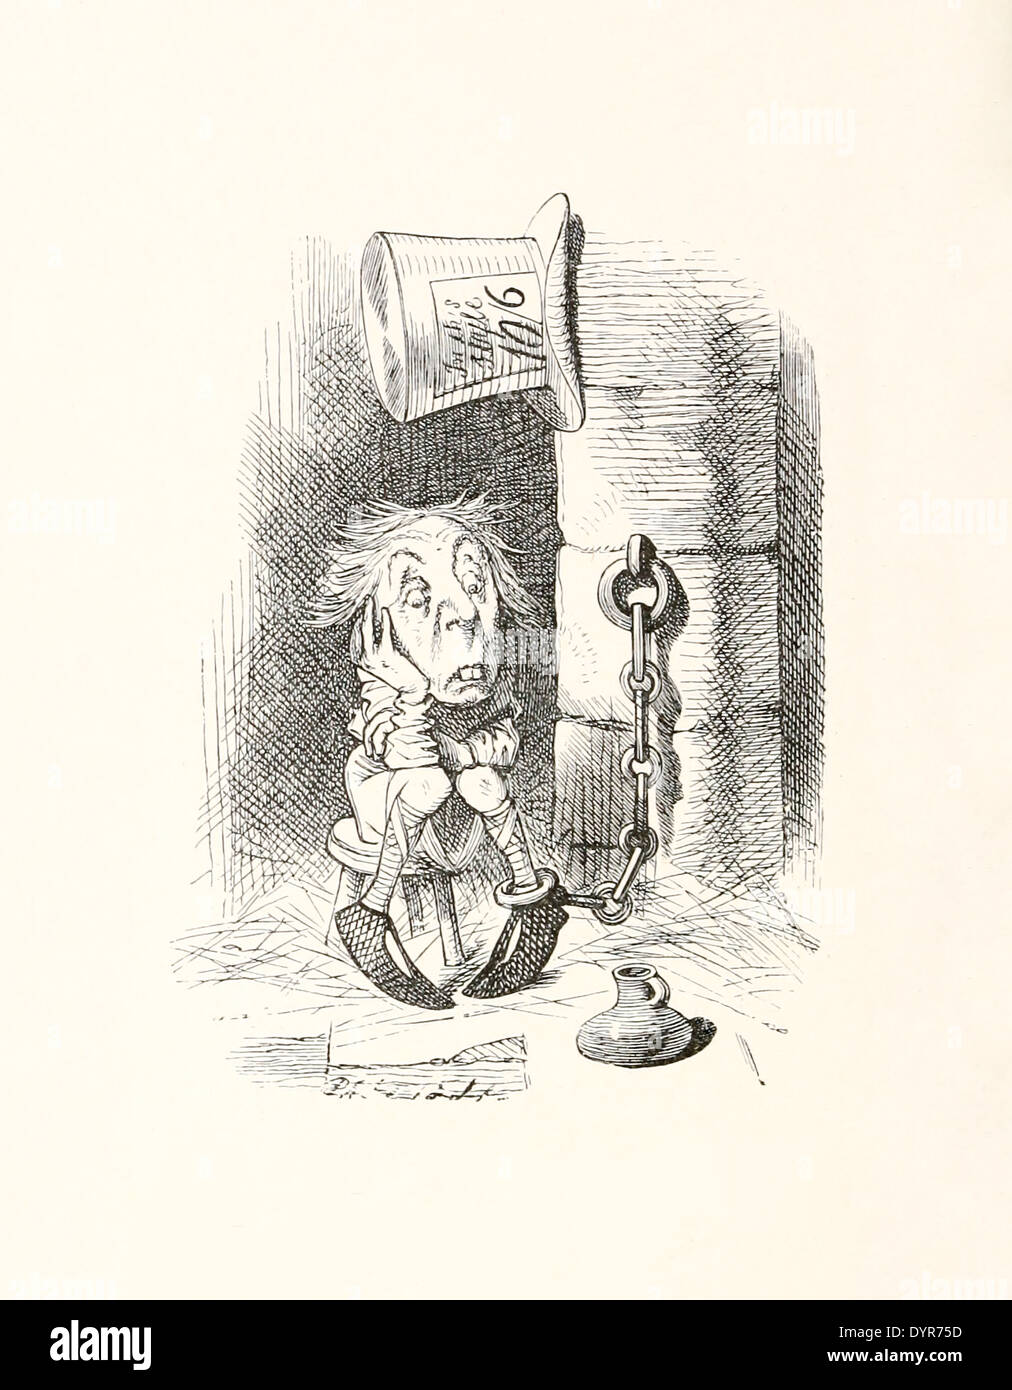 'The Hatter Imprisoned' from John Tenniel (1820-1914) illustration from Lewis Carroll's 'Through the Looking-Glass’ published in 1871. Stock Photo